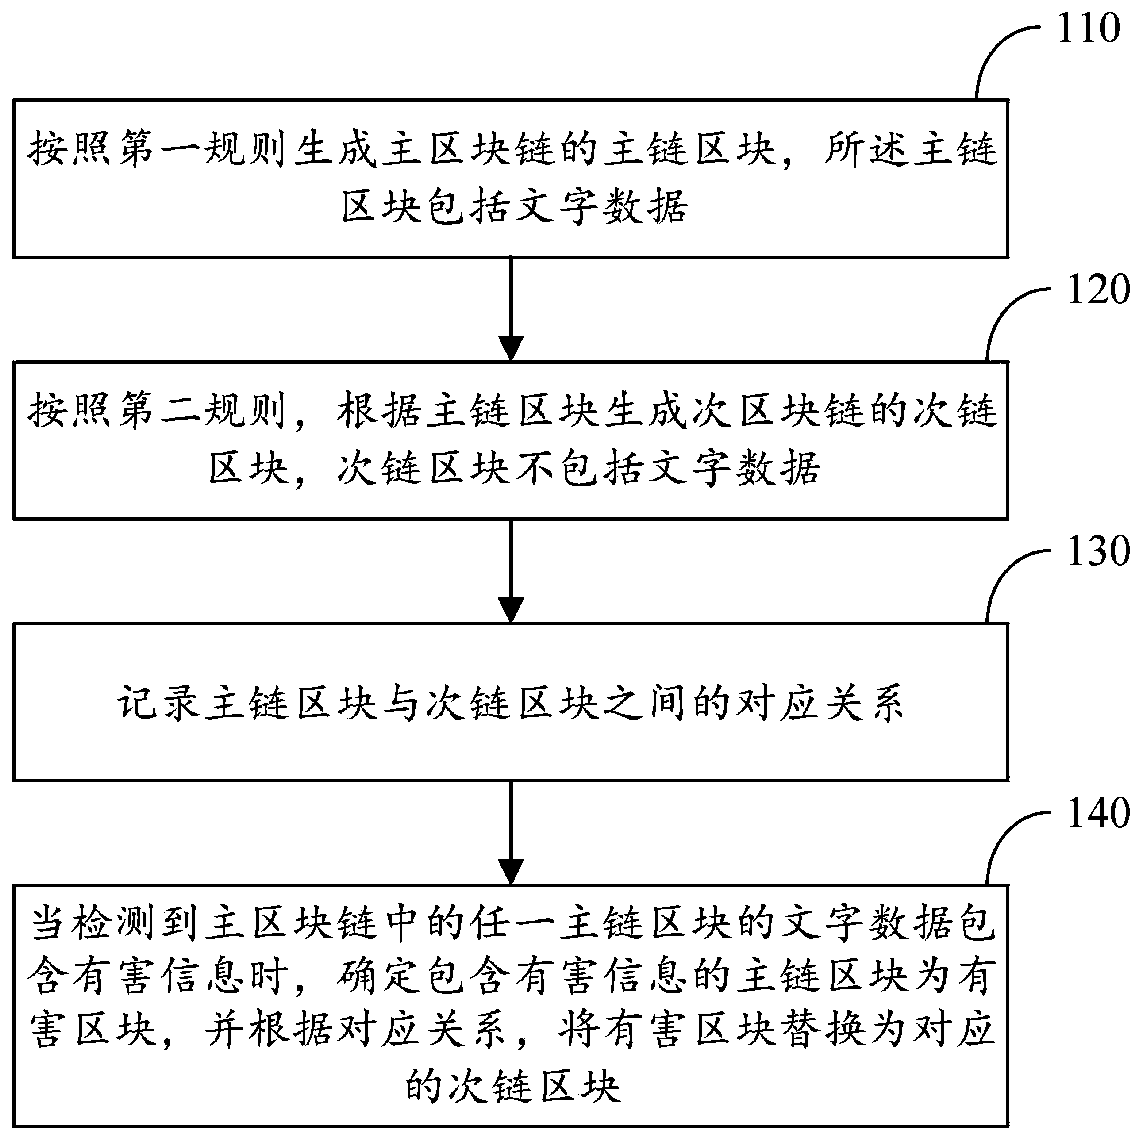 Method and system for controlling harmful information based on block chain